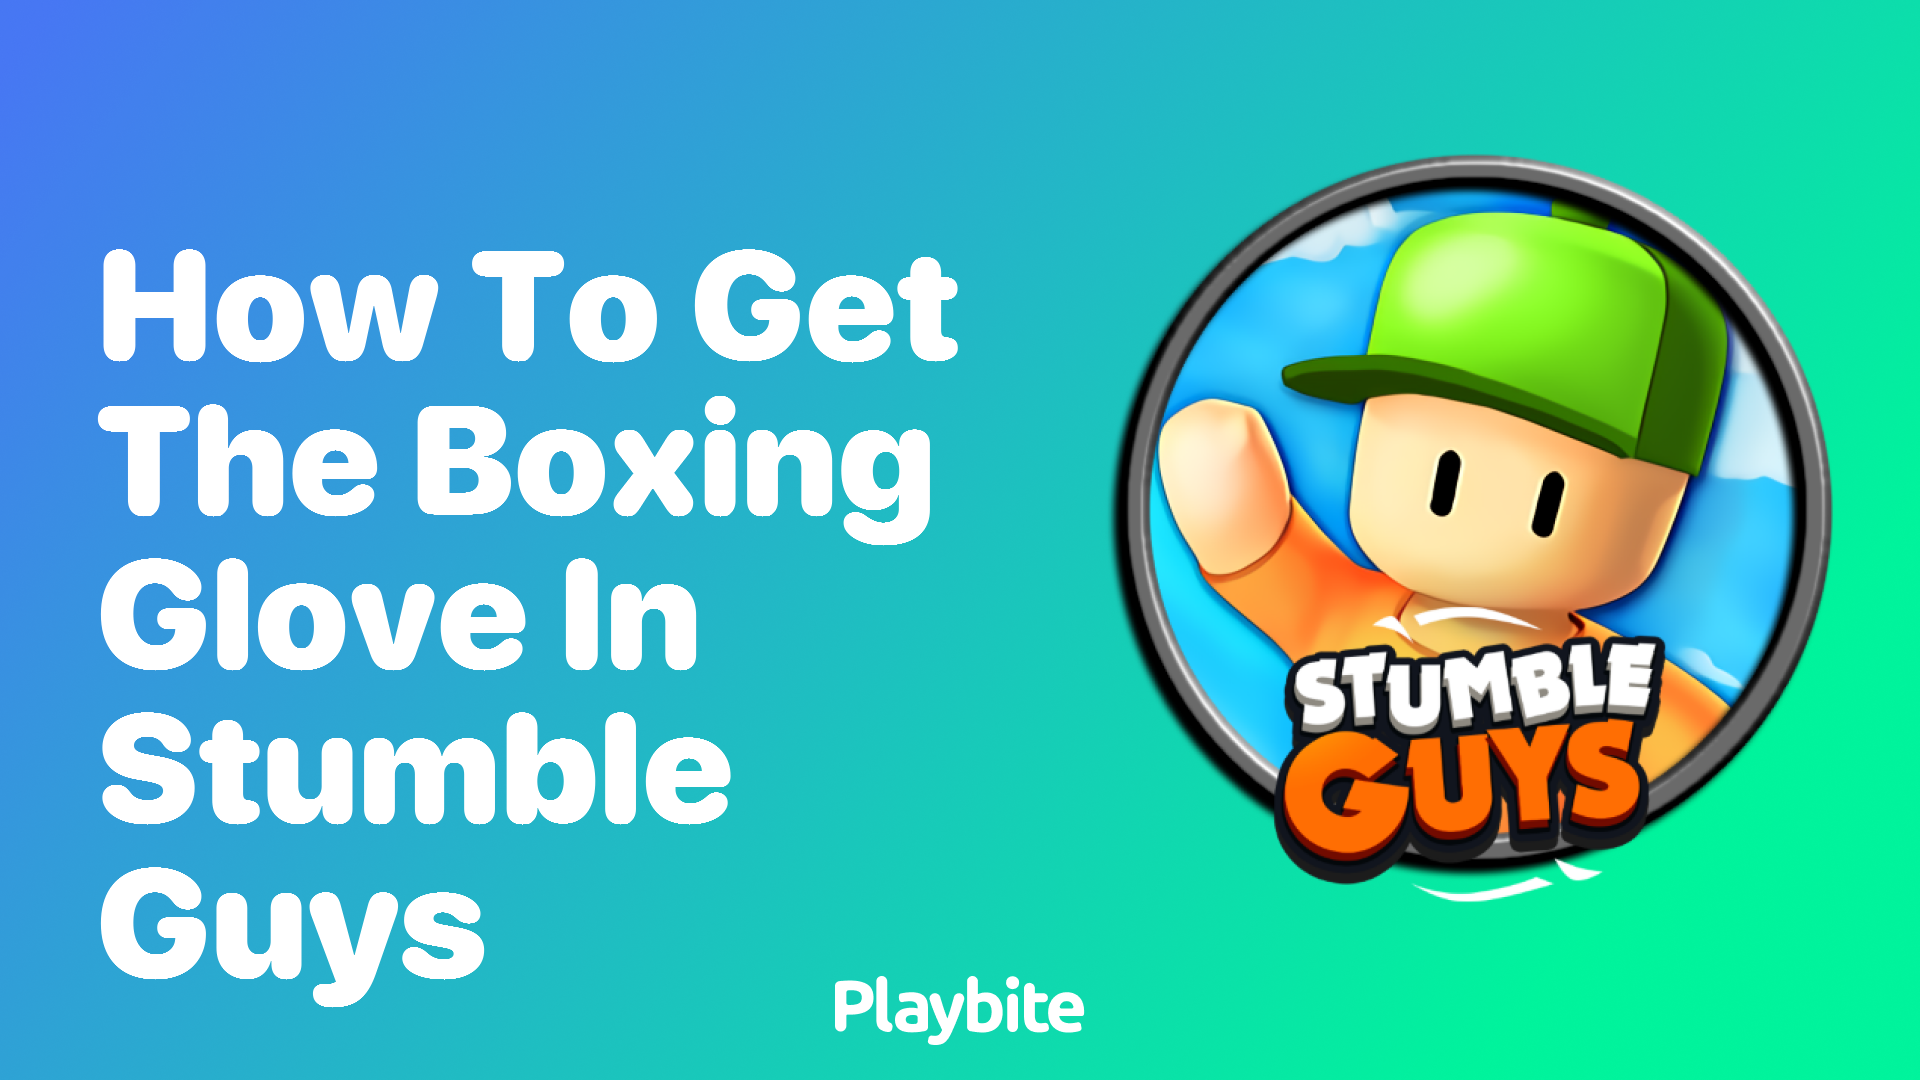 How to Get the Boxing Glove in Stumble Guys